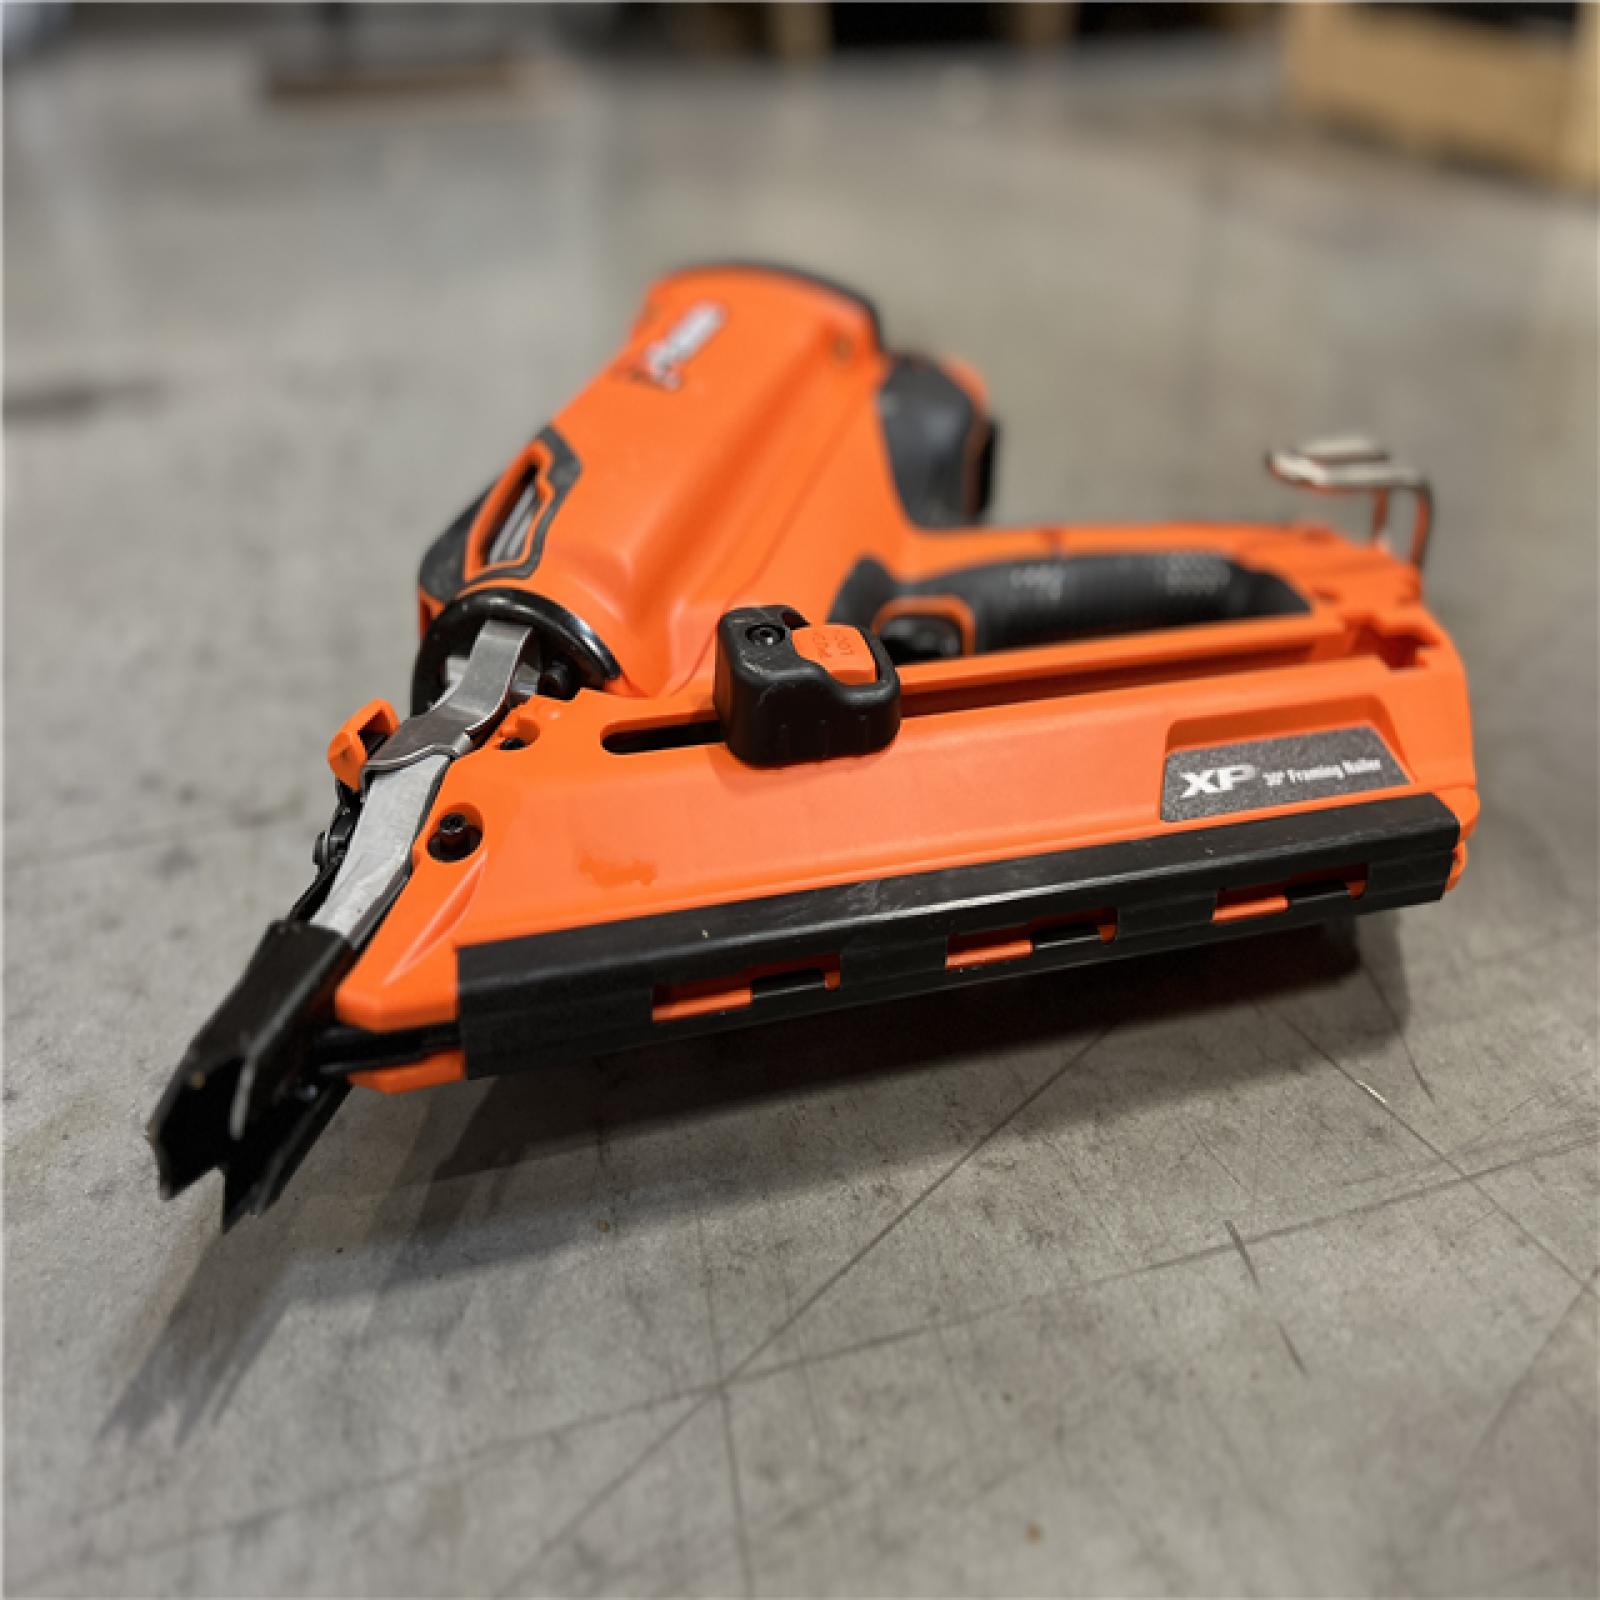 AS-IS - Paslode Lithium-Ion Battery 30° Cordless Framing Nailer